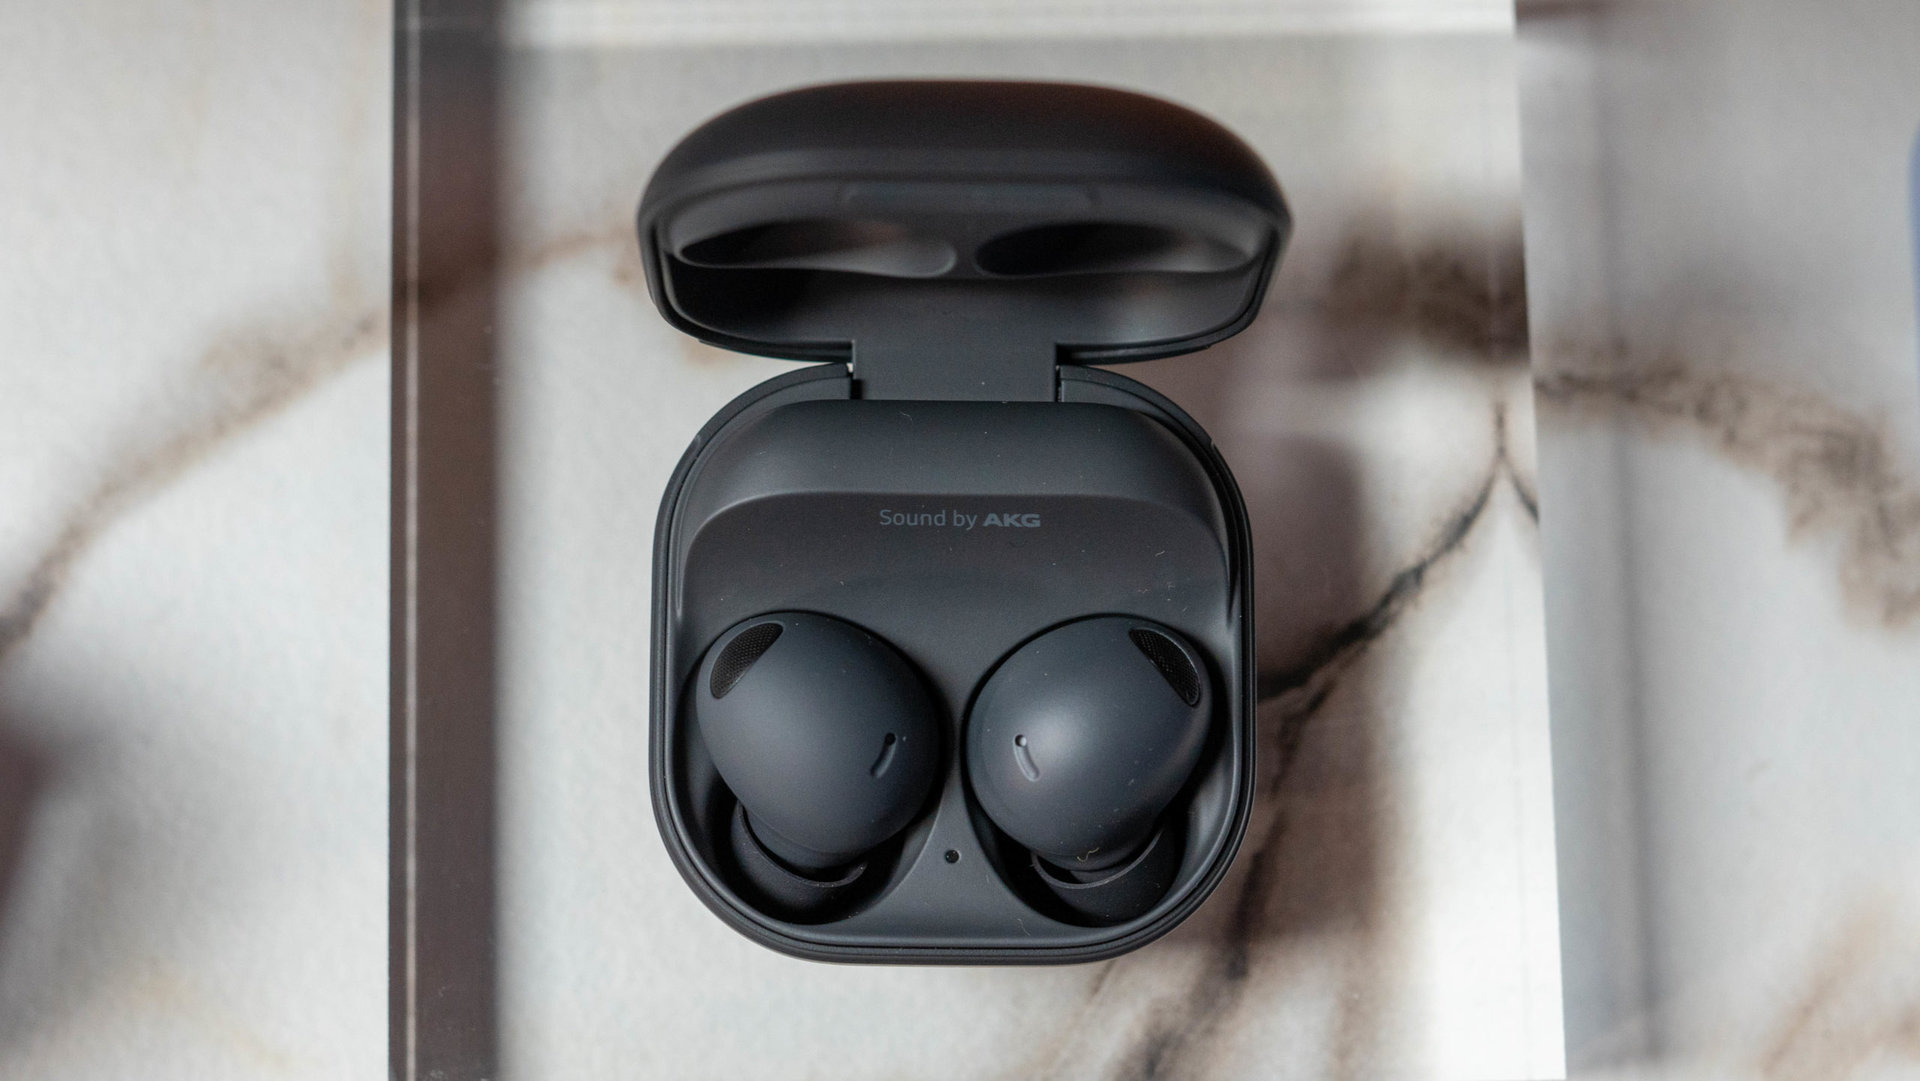 Samsung Galaxy Buds 2 Pro in graphite black color in charging case from above